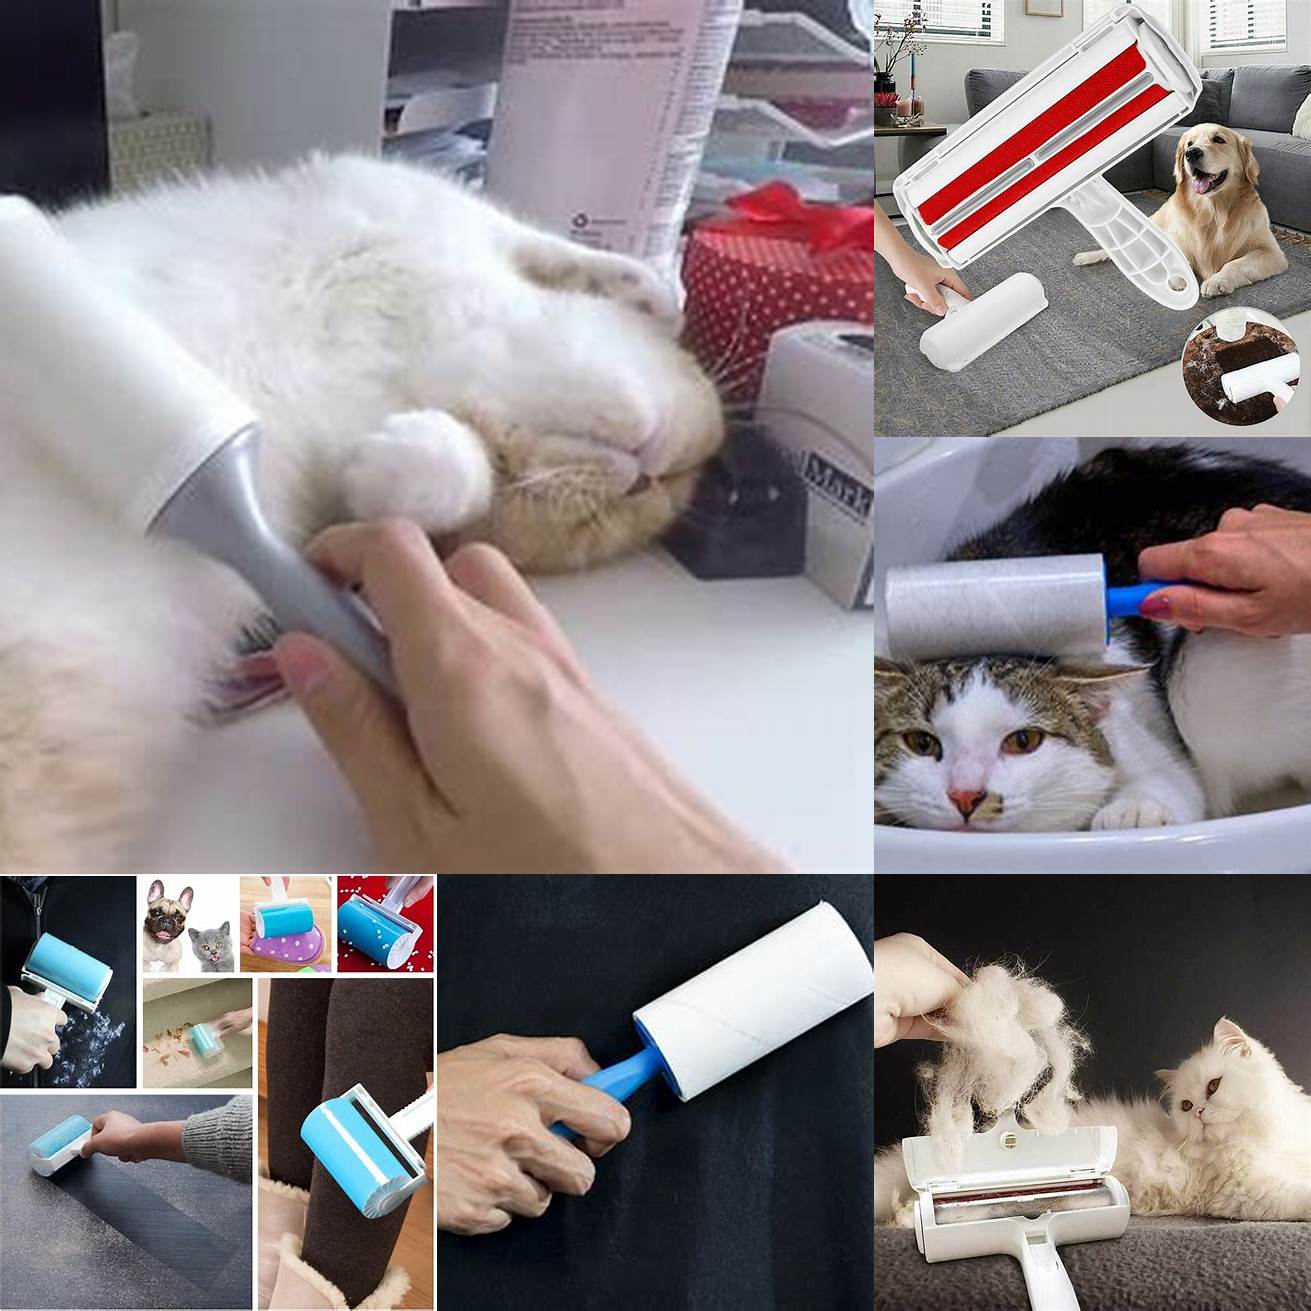 Use a lint roller for hard-to-reach areas